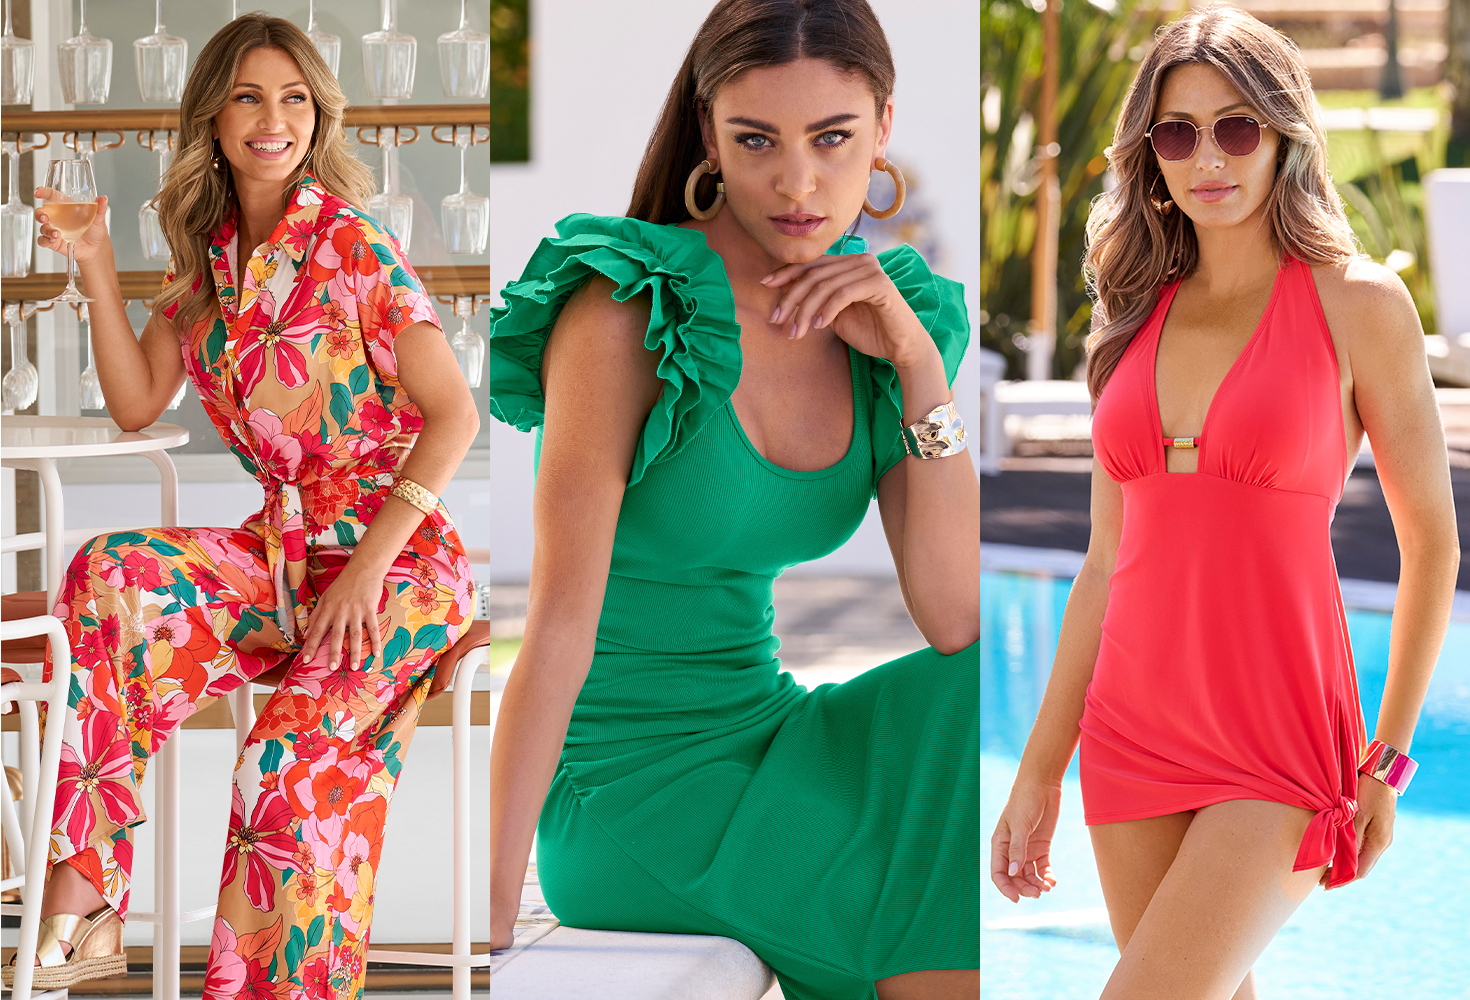 Models wearing bright floral print jumpsuit in tile 1. Tile 2 models wearing green ruffle sleeve dress and tile 3 model is wearing a coral one piece.